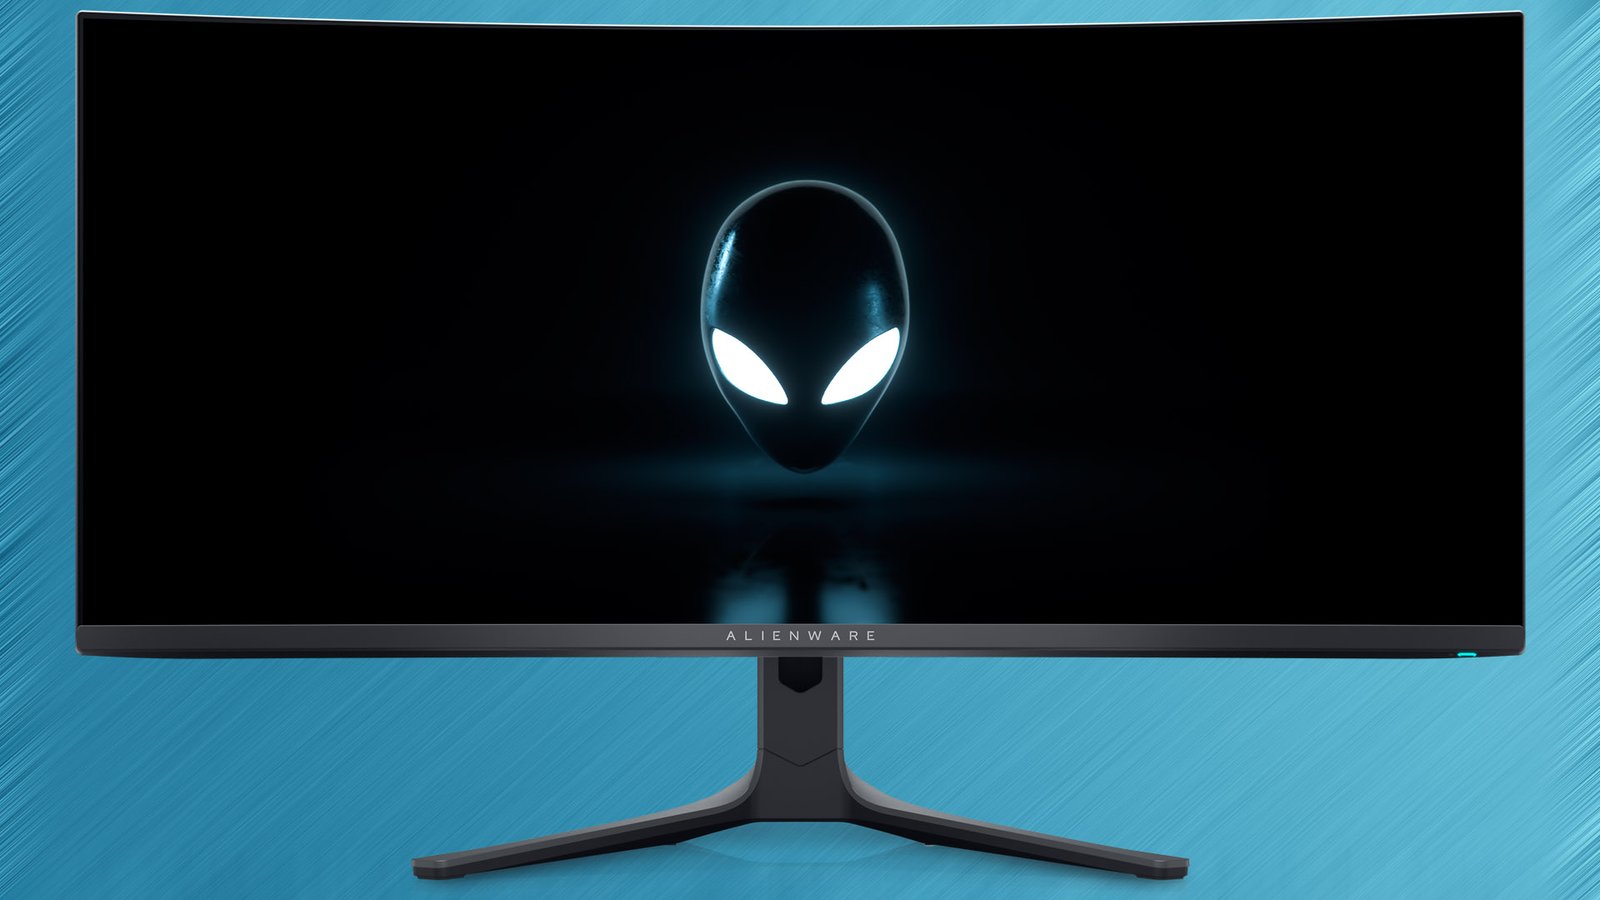 Alienware’s new ultrawide QD-OLED video display drops the mark (and the G-Sync)